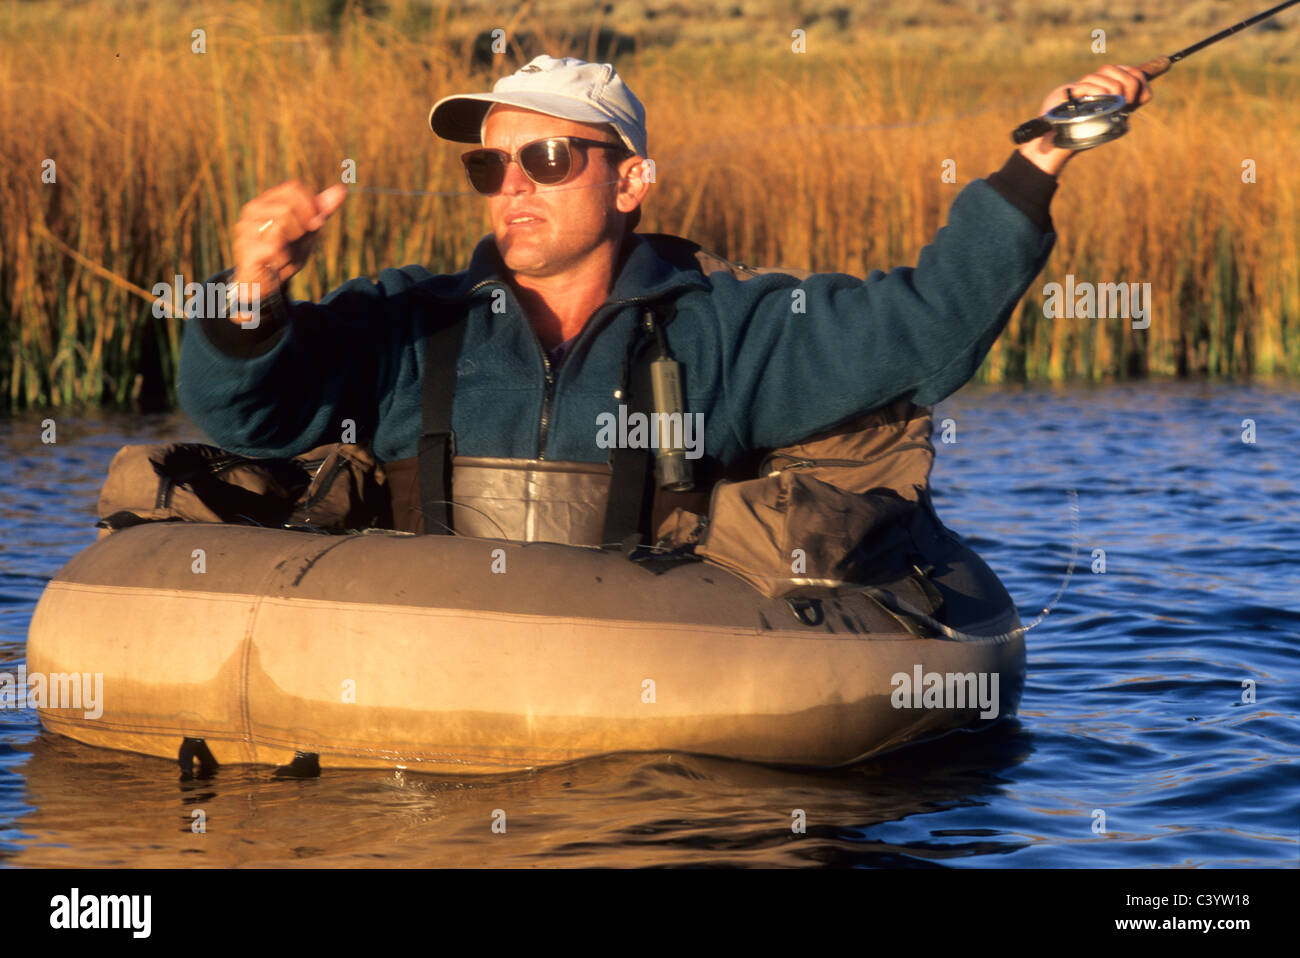 man fly fishing on river with rubber pontoon raft Stock Photo - Alamy